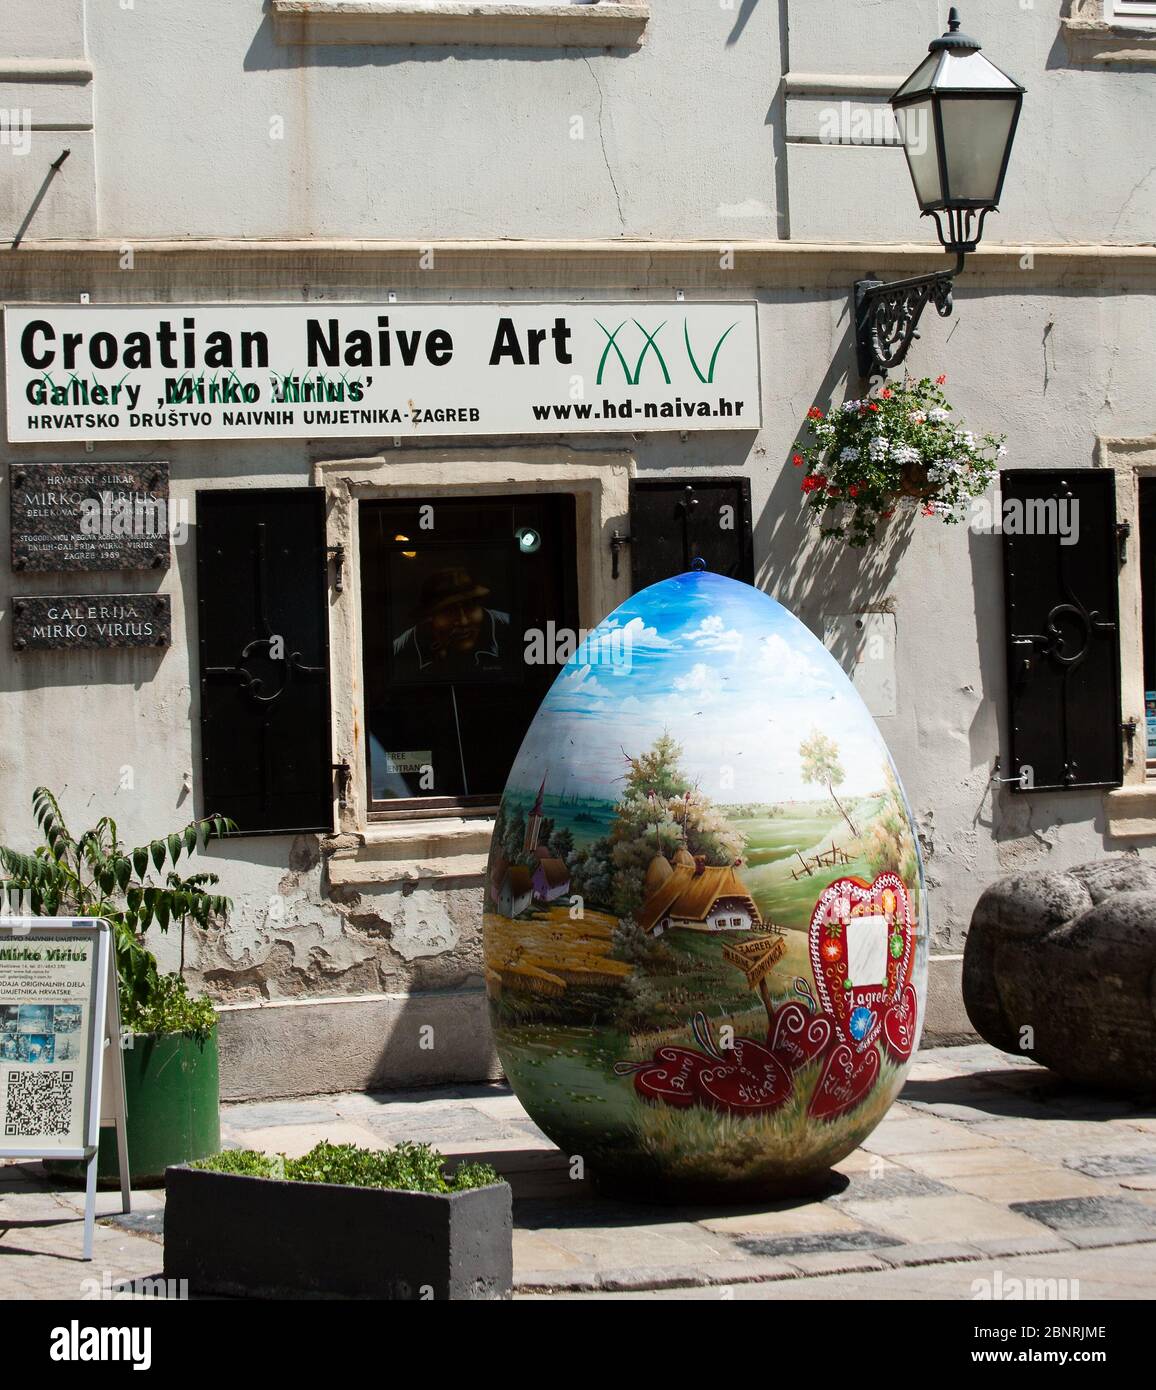 Outside infront of the Croatian Naive Art Gallery on the street in Zagreb is a large painted Easter egg Stock Photo